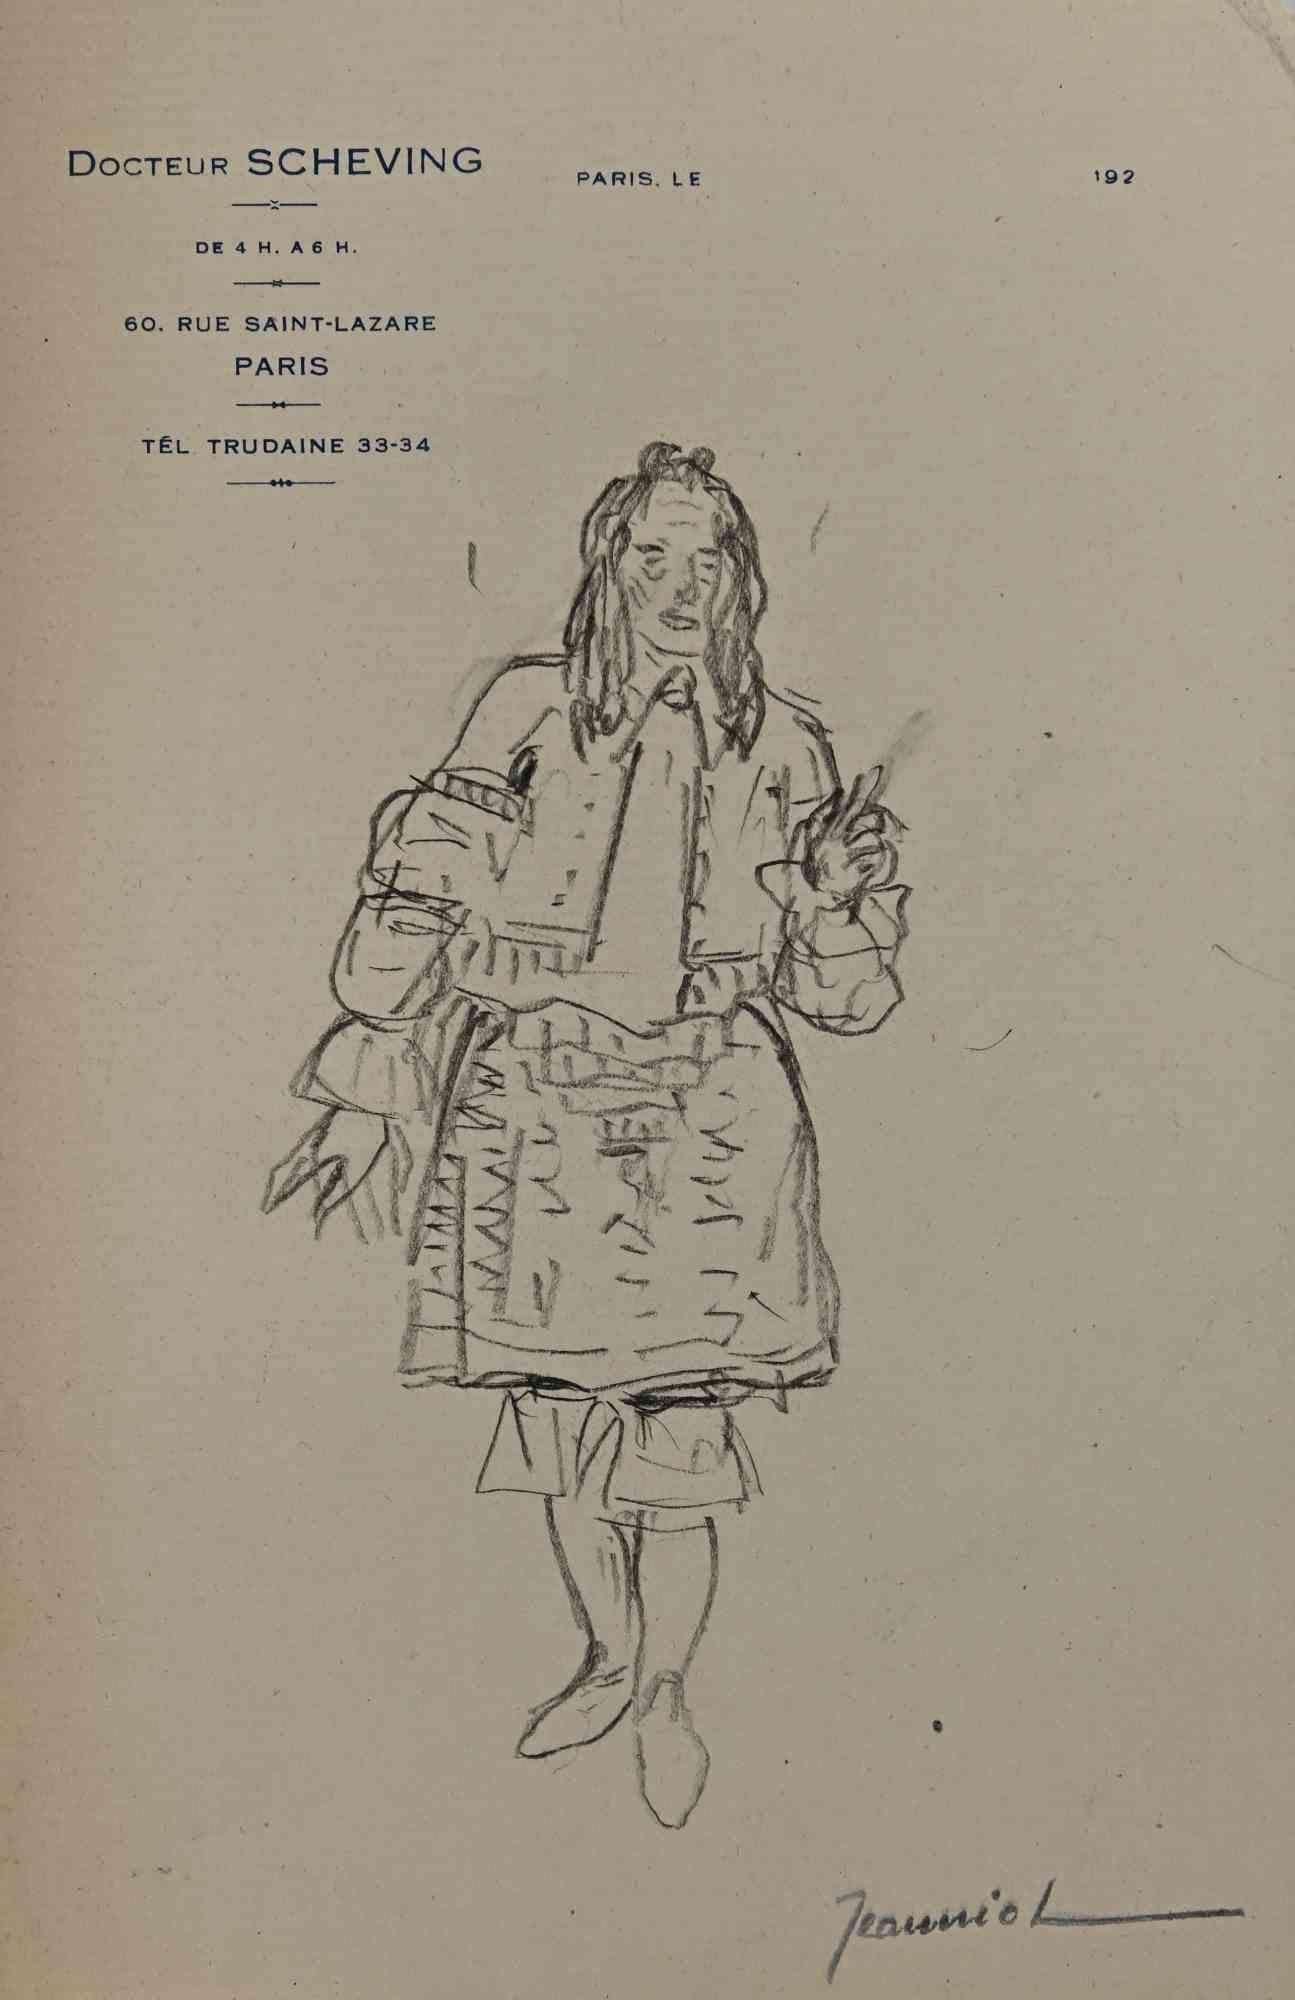 Man in Costume is an original Drawing on paper realized by the painter Pierre Georges Jeanniot (1848-1934).

Drawing in Pencil.

Hand-signed on the lower.

Good conditions except for being aged.

The artwork is represented through deft and quick